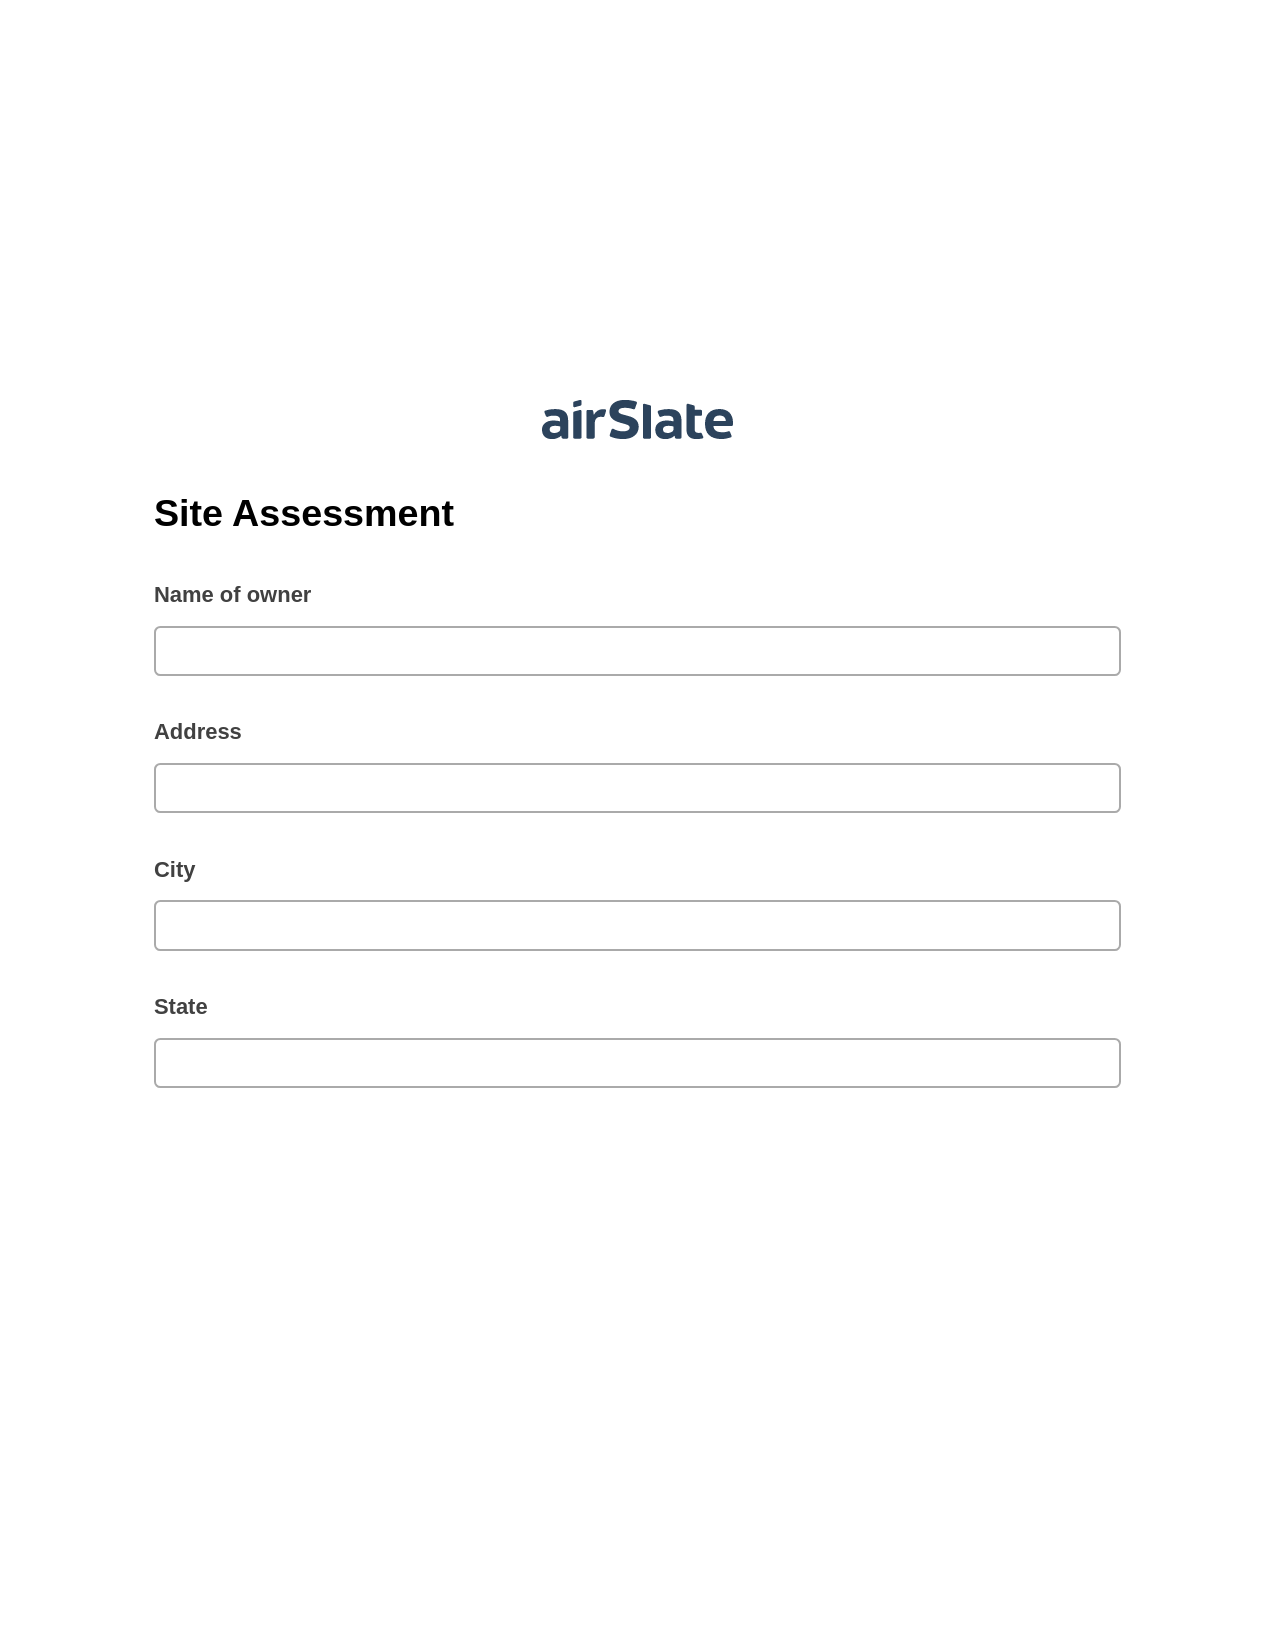 Site Assessment Pre-fill from Salesforce Records with SOQL Bot, Pre-fill with Custom Data Bot, Export to Excel 365 Bot